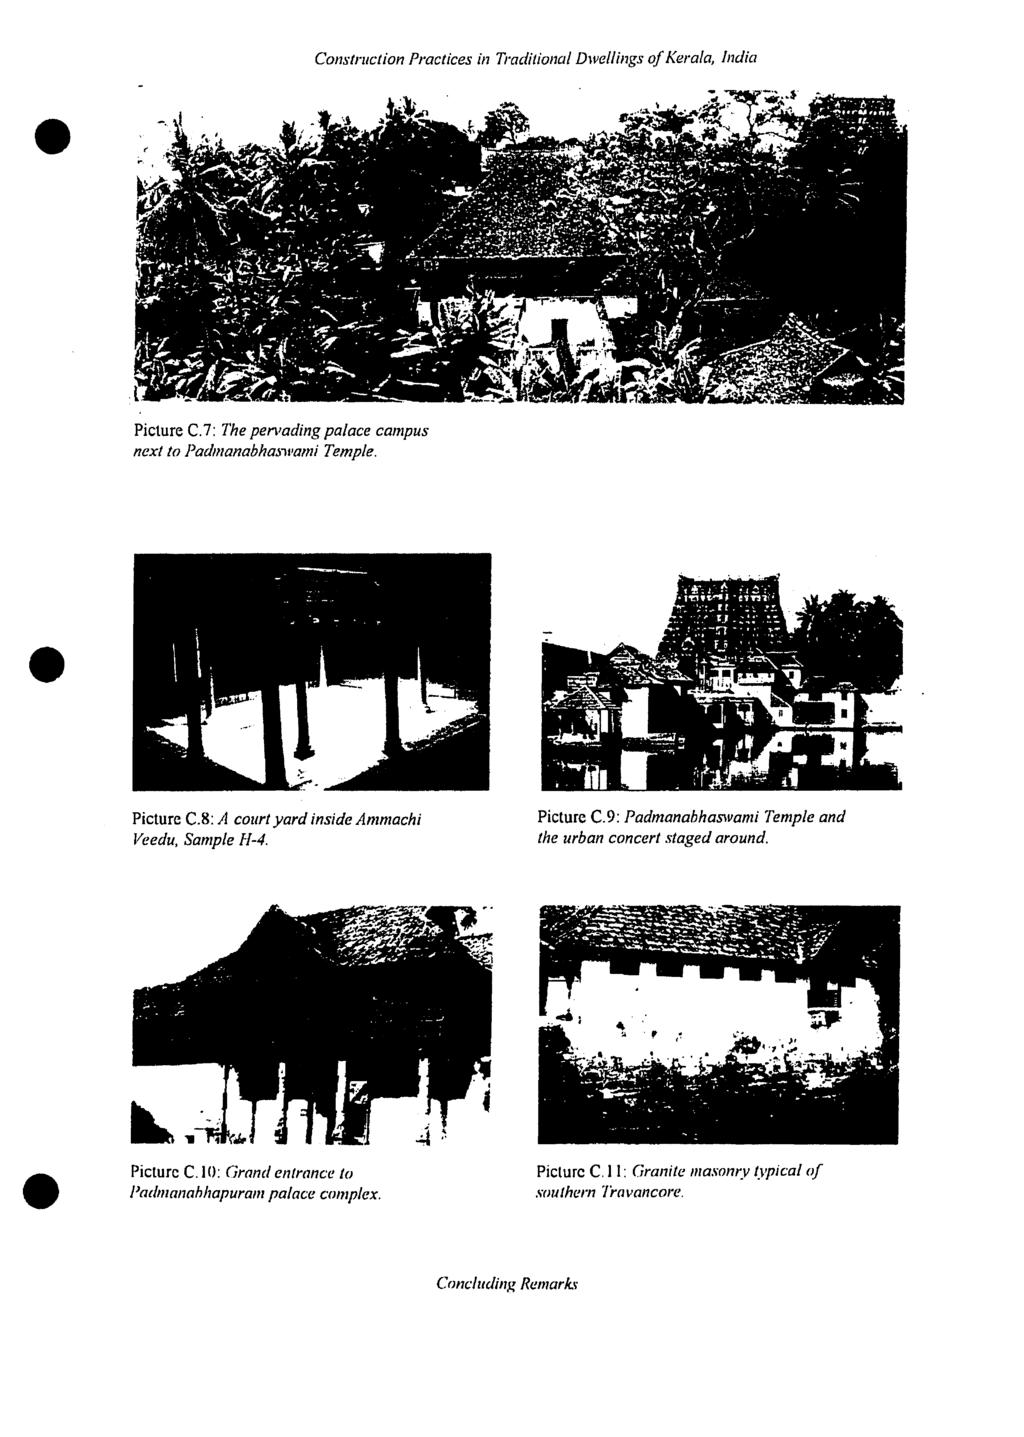 , lndia Picture C.7: The pervading palace campus next to Padmanabhmll'ami Temple. Picture C.8: A court yard inside Ammachi Veedu. Sample fl-4. Picture C.9: Padmanahhaswami Temple and the urban concert staged around.